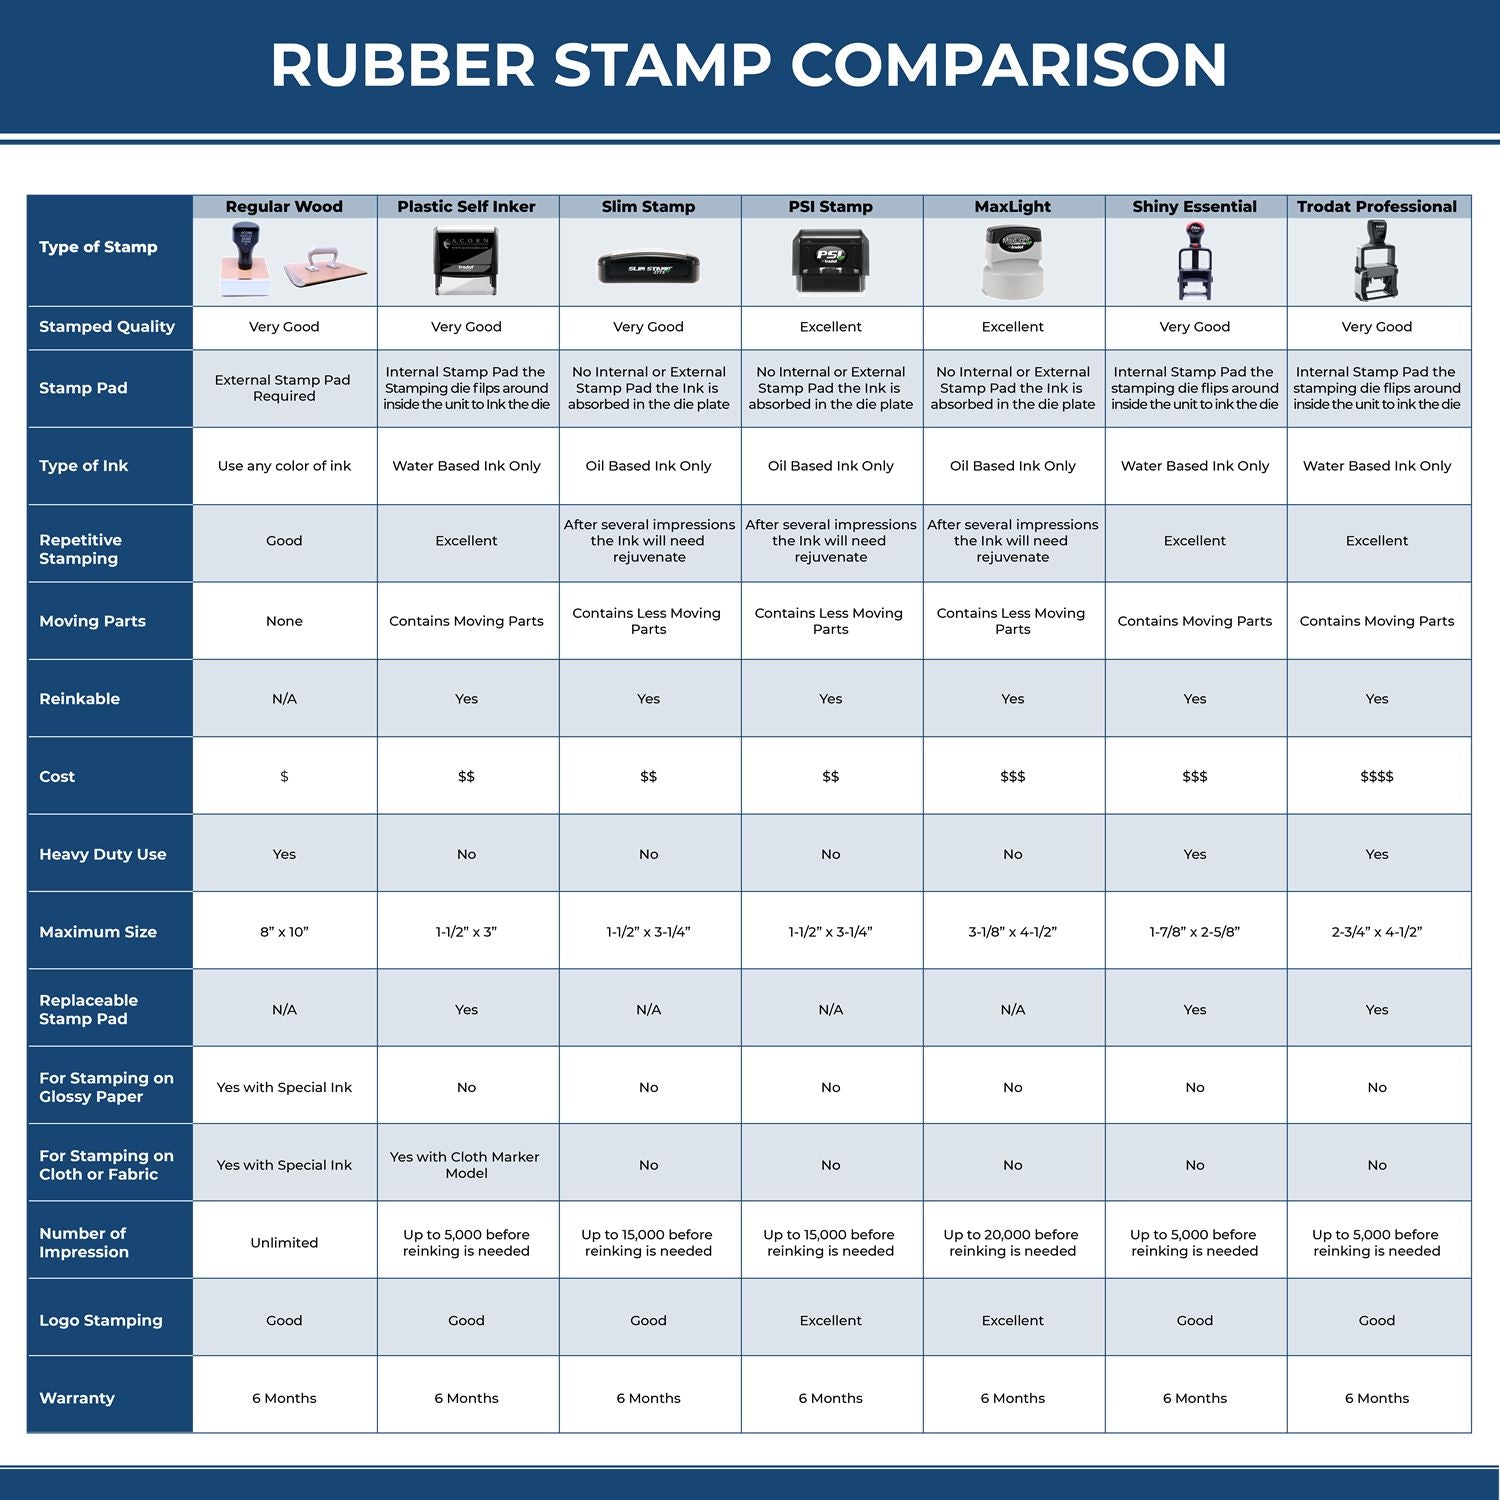 A comparison chart for the different types of mount models available for the Wisconsin Professional Engineer Seal Stamp.